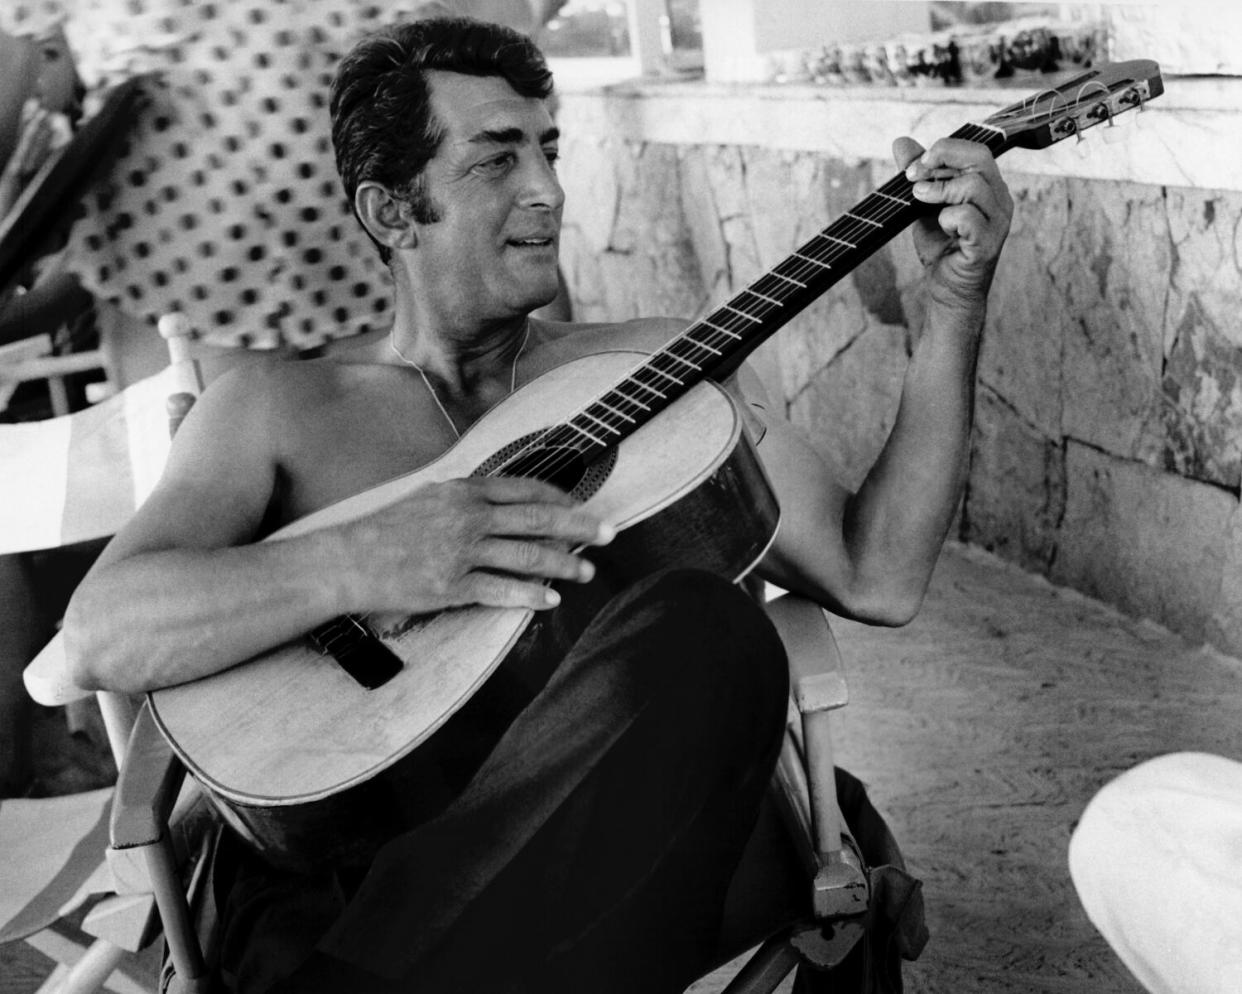 A man, shirtless, seated and playing the acoustic guitar